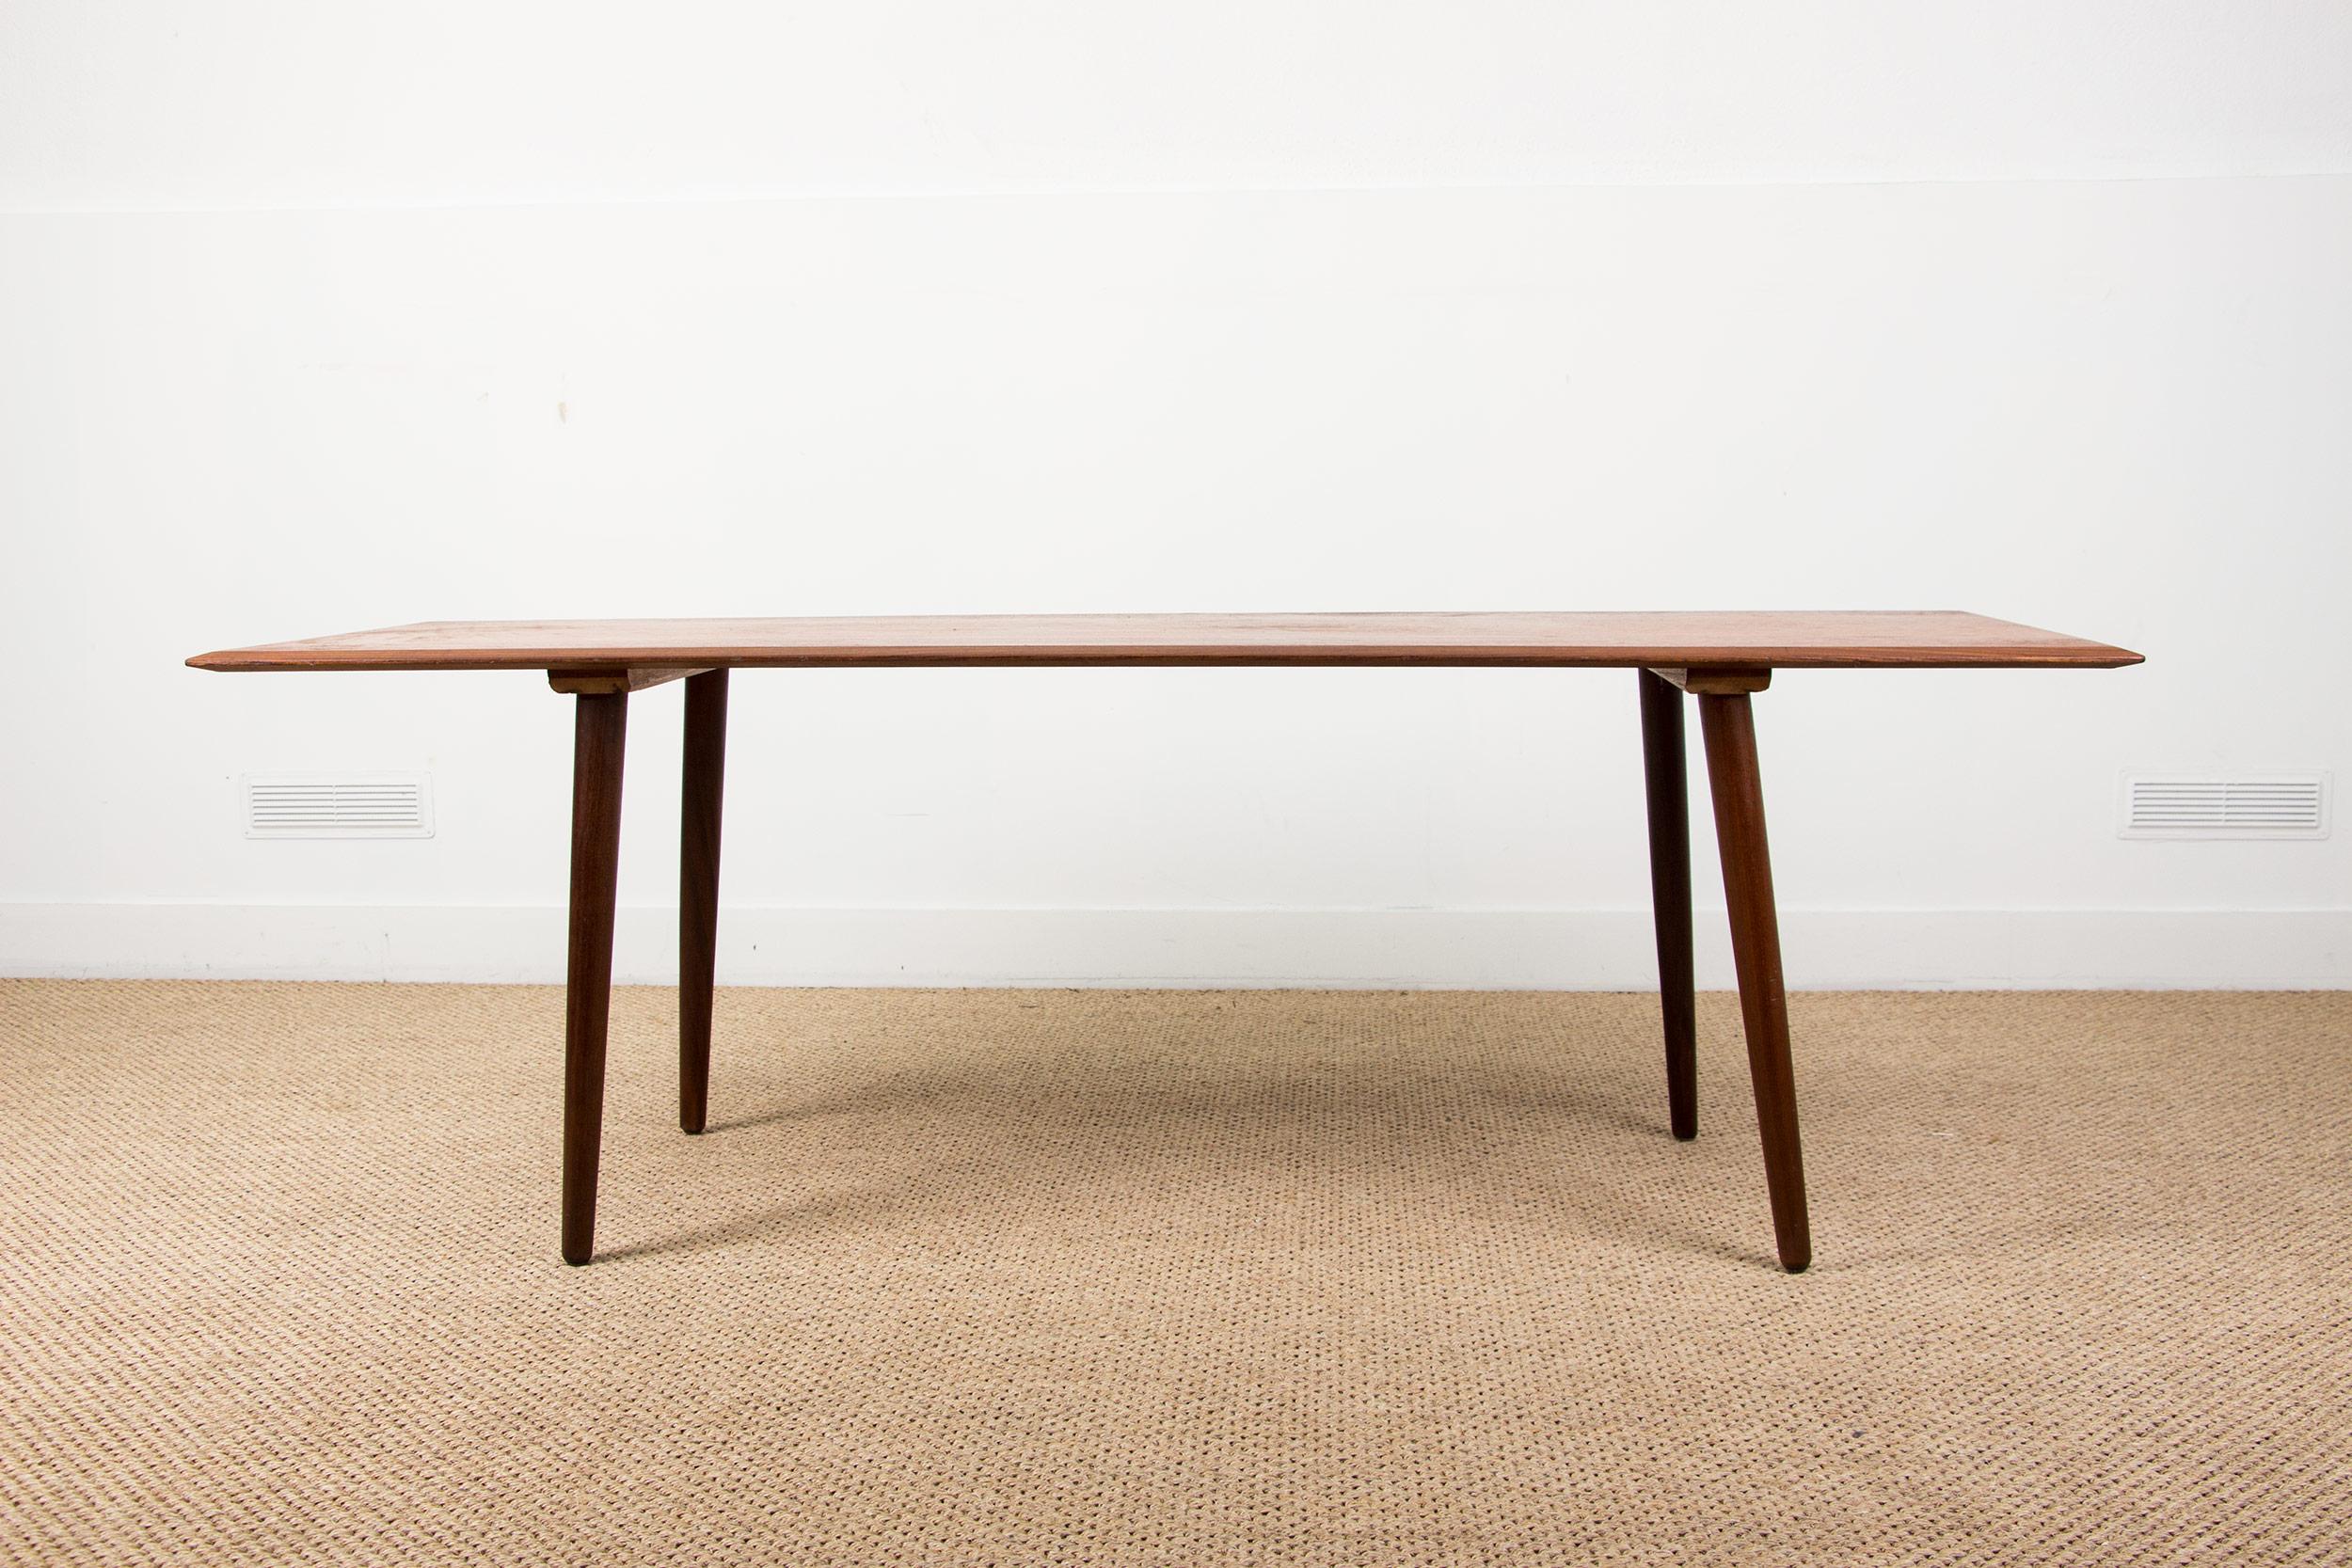 Superb Scandinavian coffee table with large dimensions. Very good quality of design and manufacture. Extra thin tray.